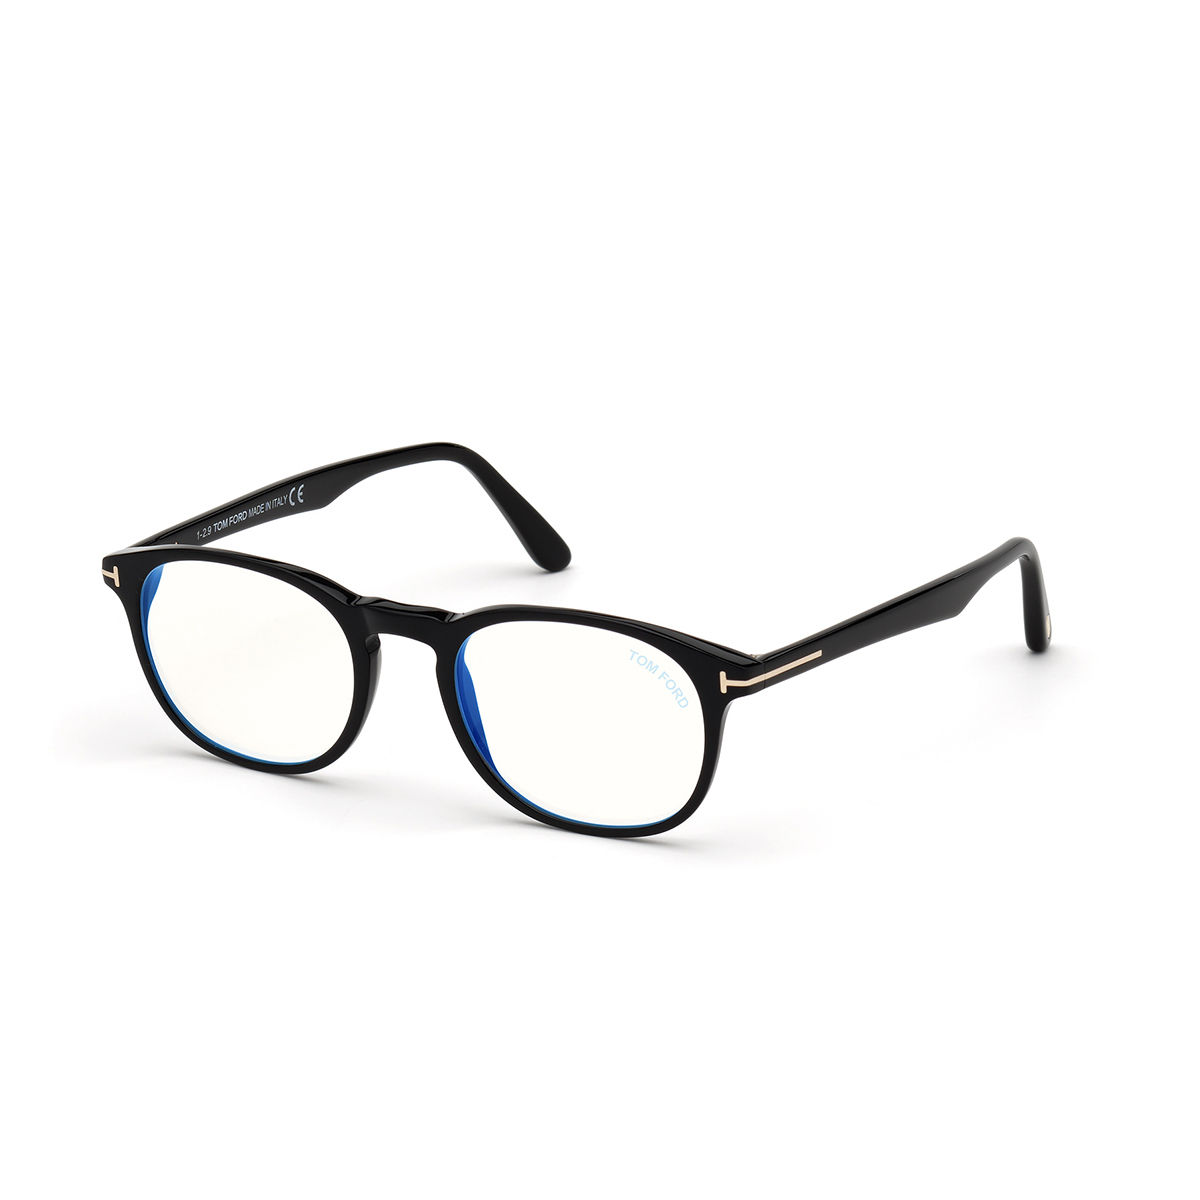 Tom Ford Sunglasses Black Plastic Eyeglasses FT5680-B 51 001: Buy Tom Ford  Sunglasses Black Plastic Eyeglasses FT5680-B 51 001 Online at Best Price in  India | Nykaa